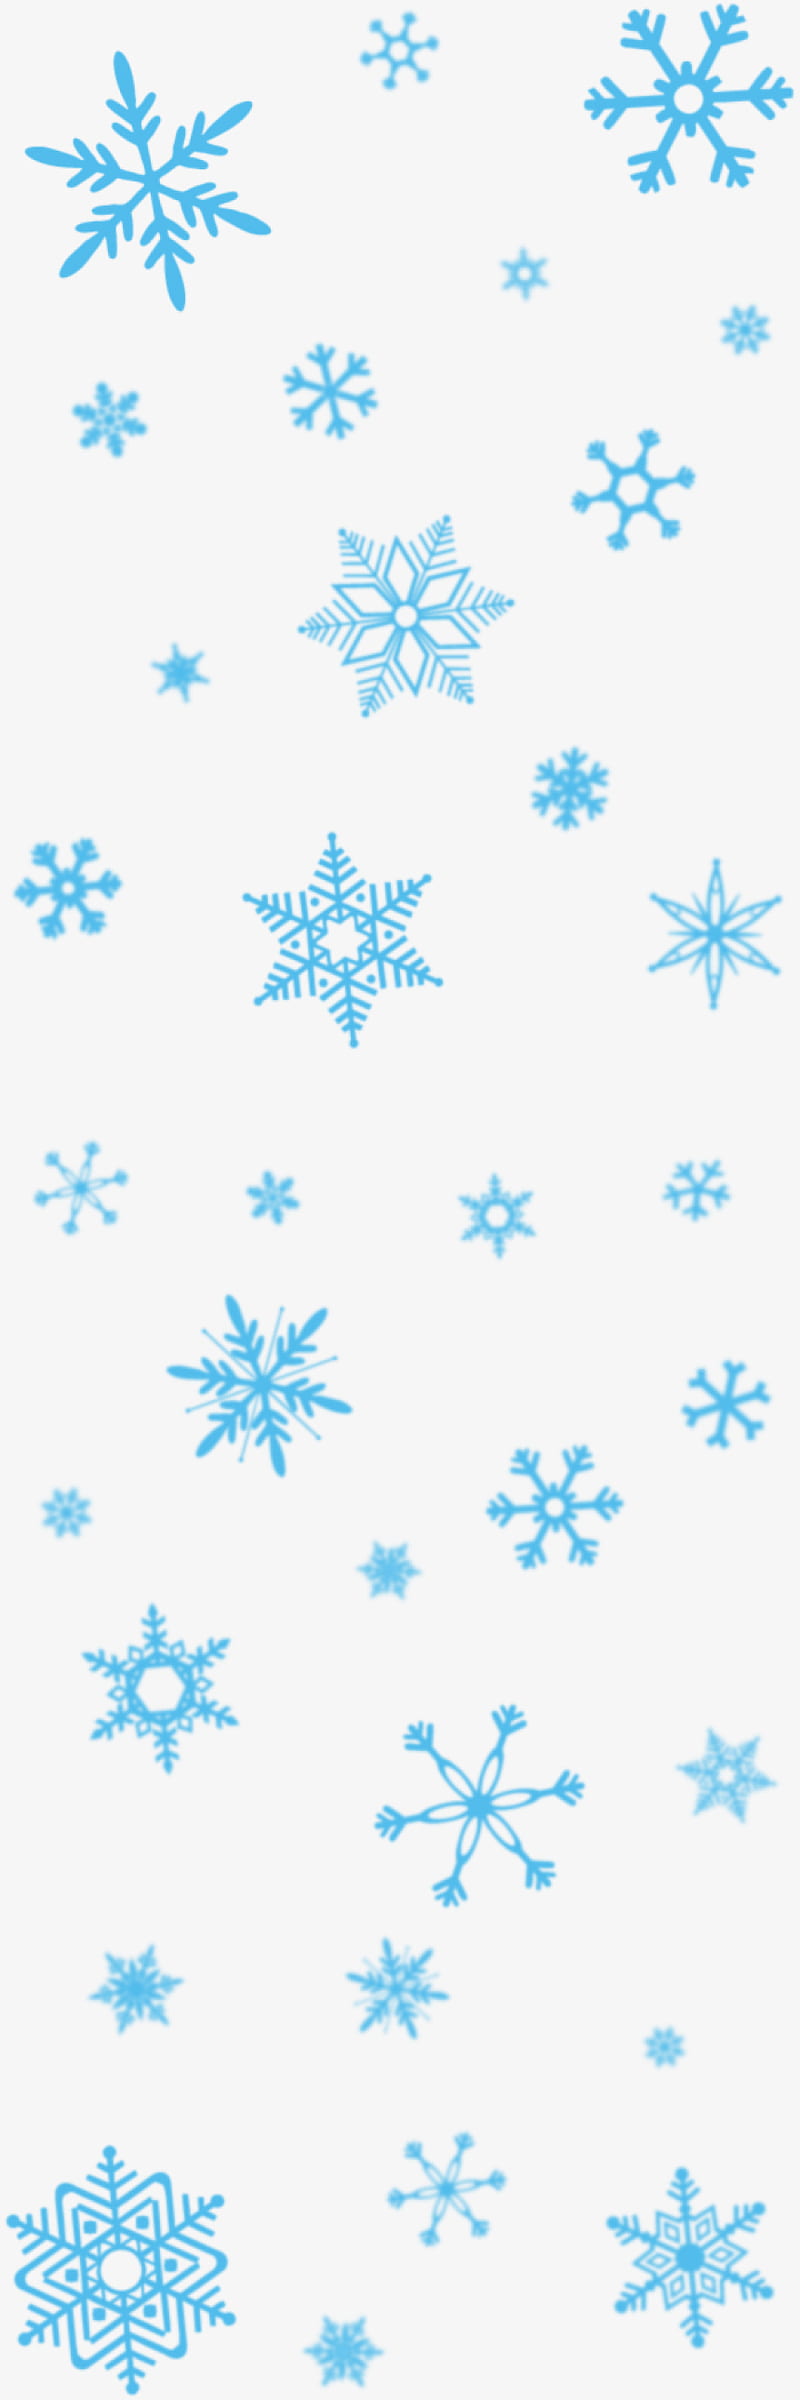 How to Draw Snowflakes from Disney Frozen Movie with Easy to Follow Steps   How to Draw Step by Step Drawing Tutorials